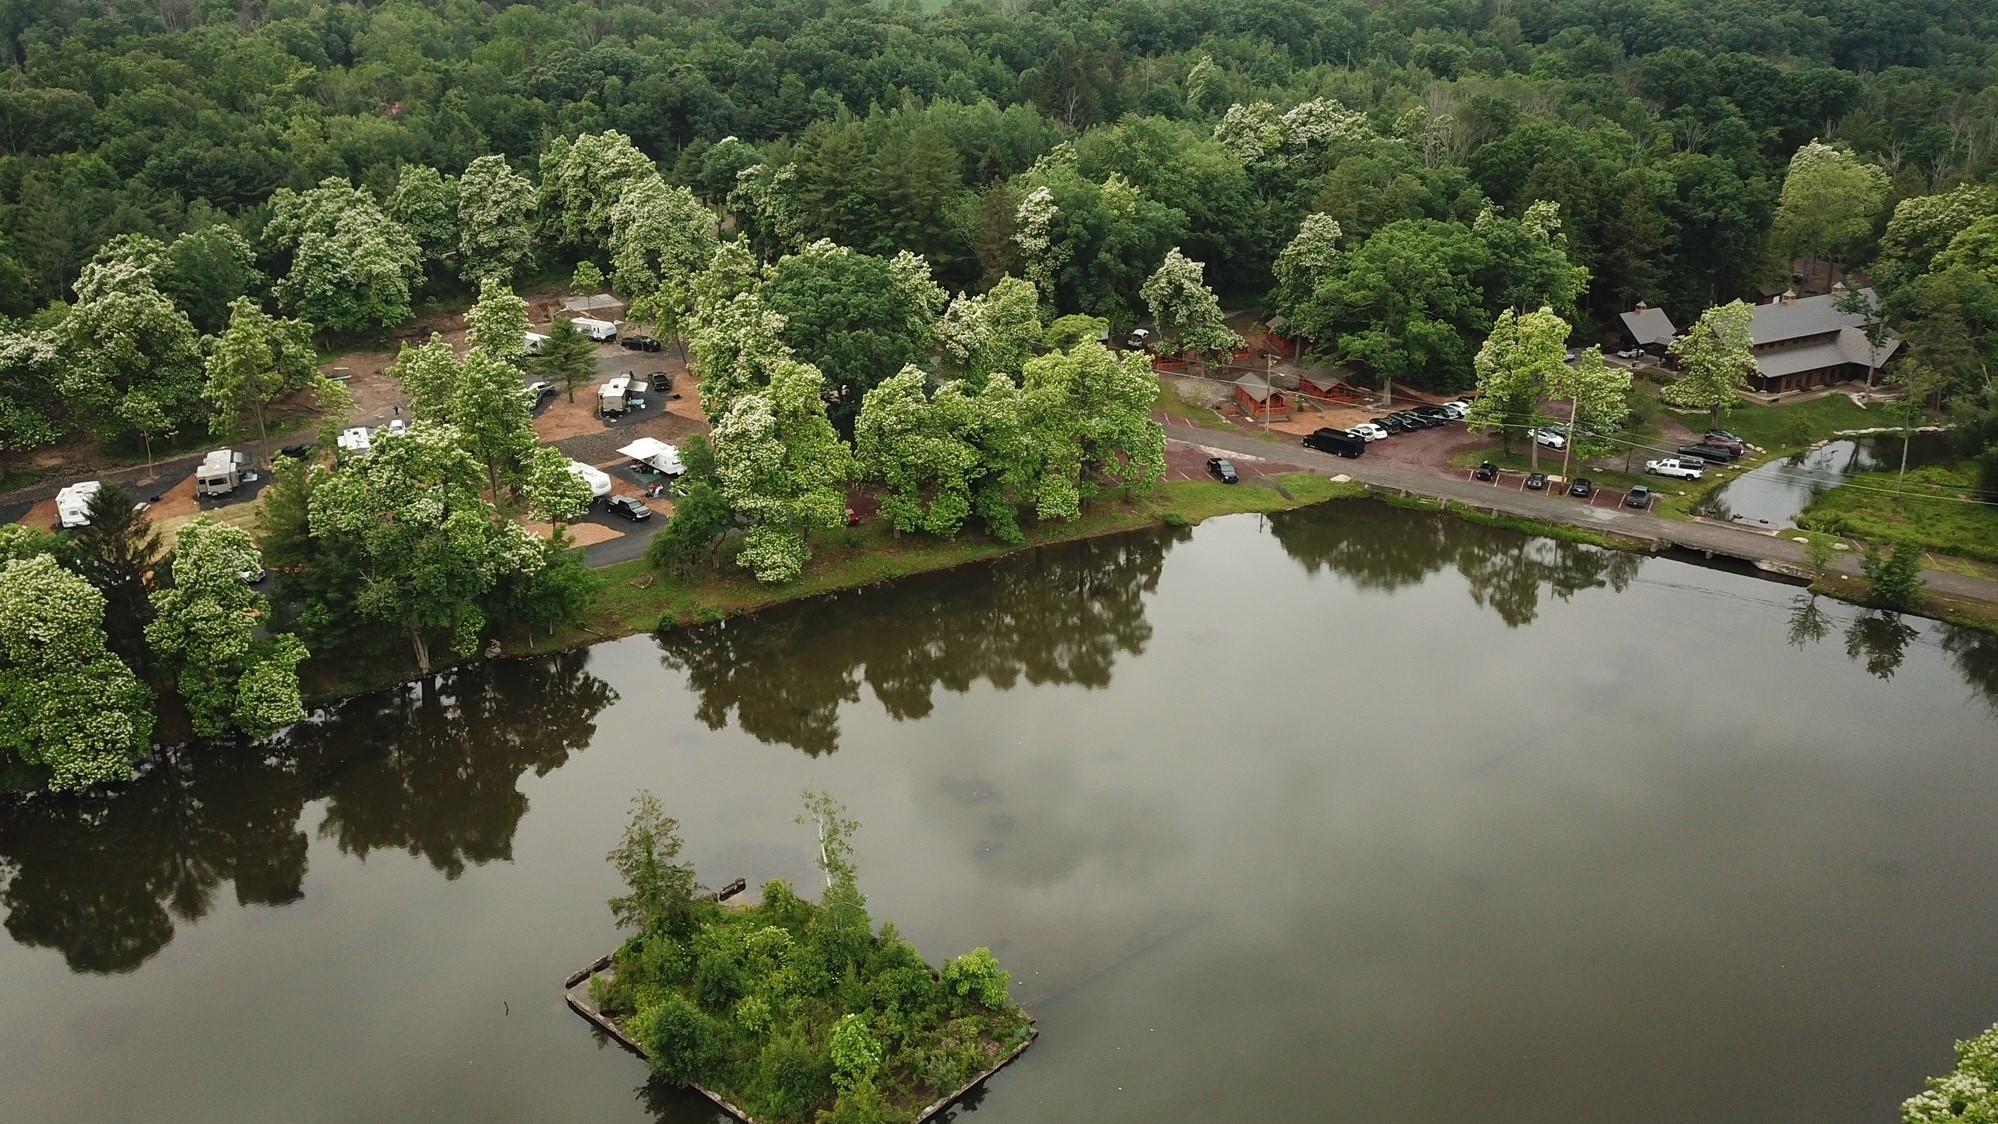 Image of our lake and campground